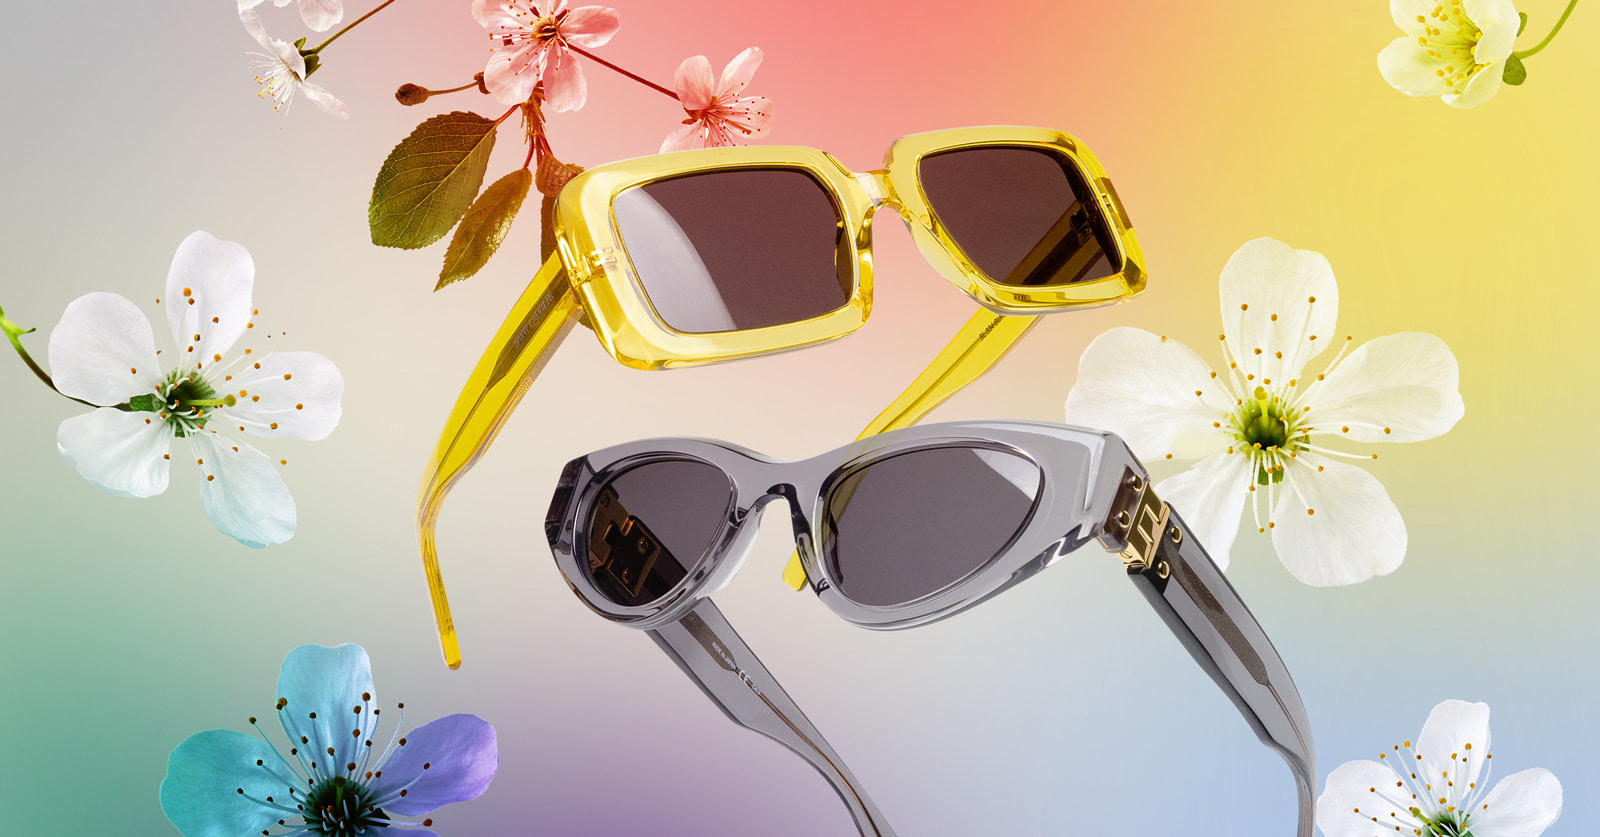 Colorful Sunglasses are Taking Over for Spring 2022